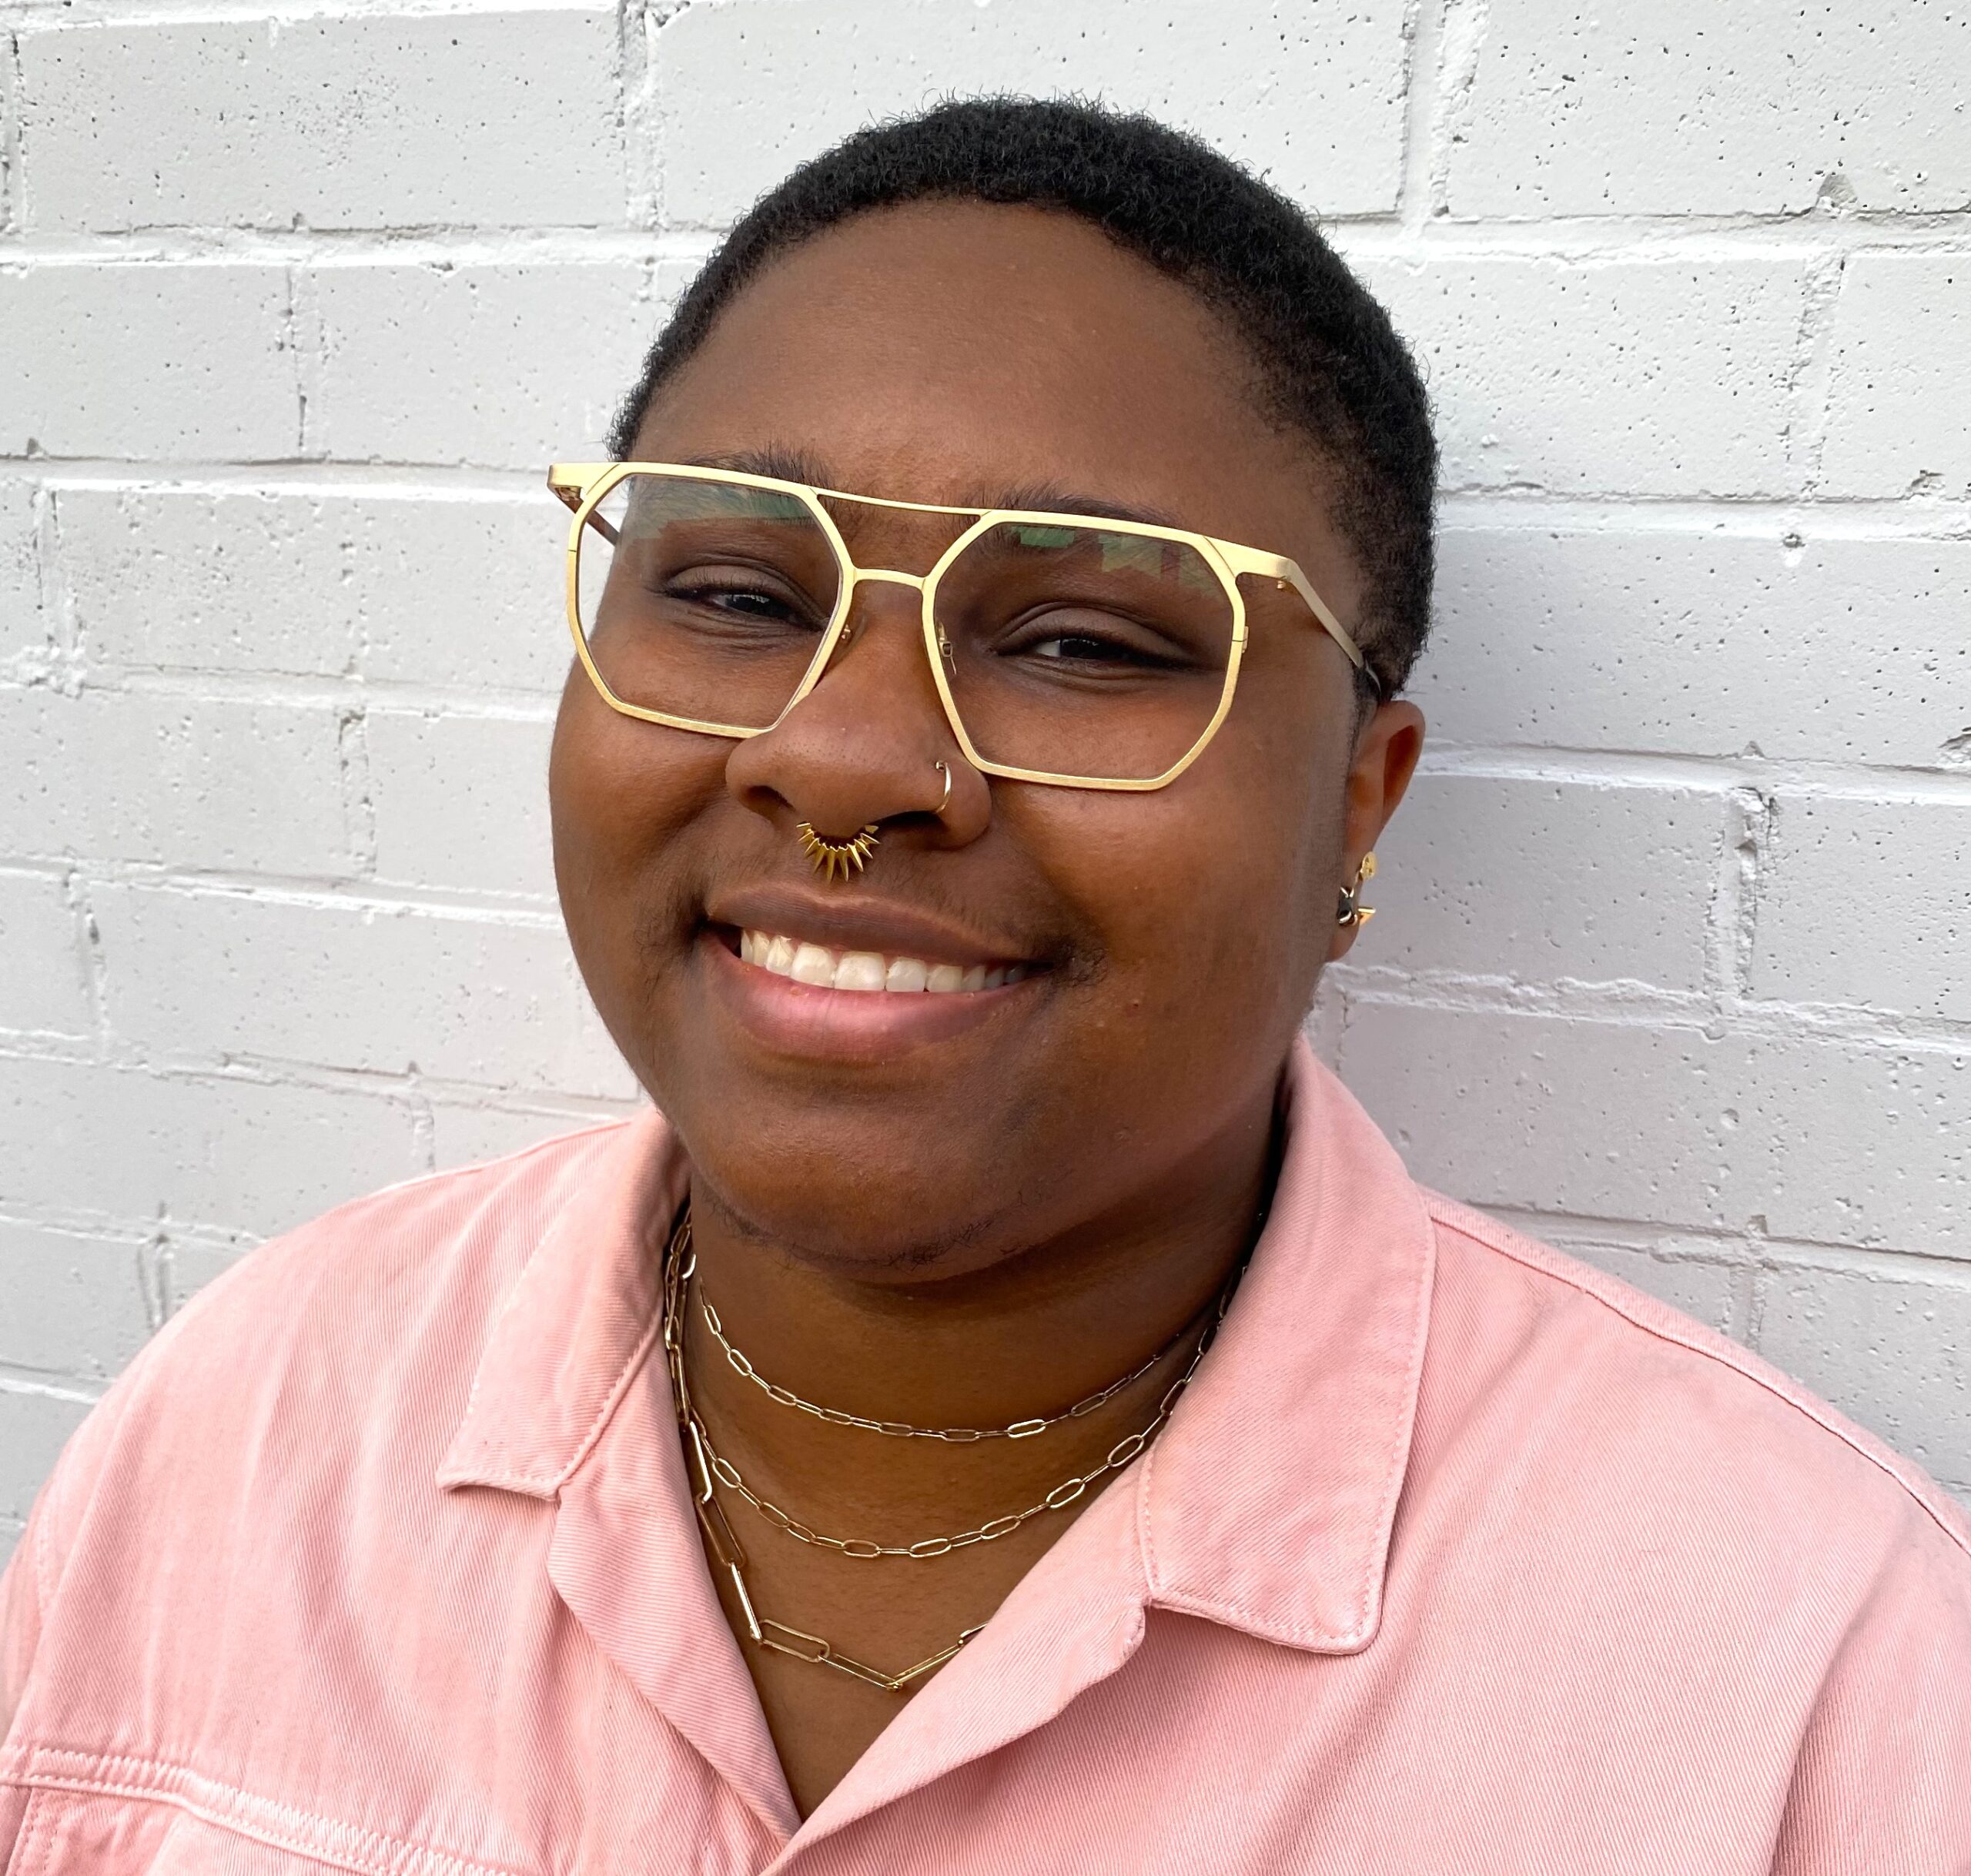 Headshot for Tahirah Green. Tahirah is smiling in front of a white brick wall, and wears a pink button-up shirt with gold rim glasses.